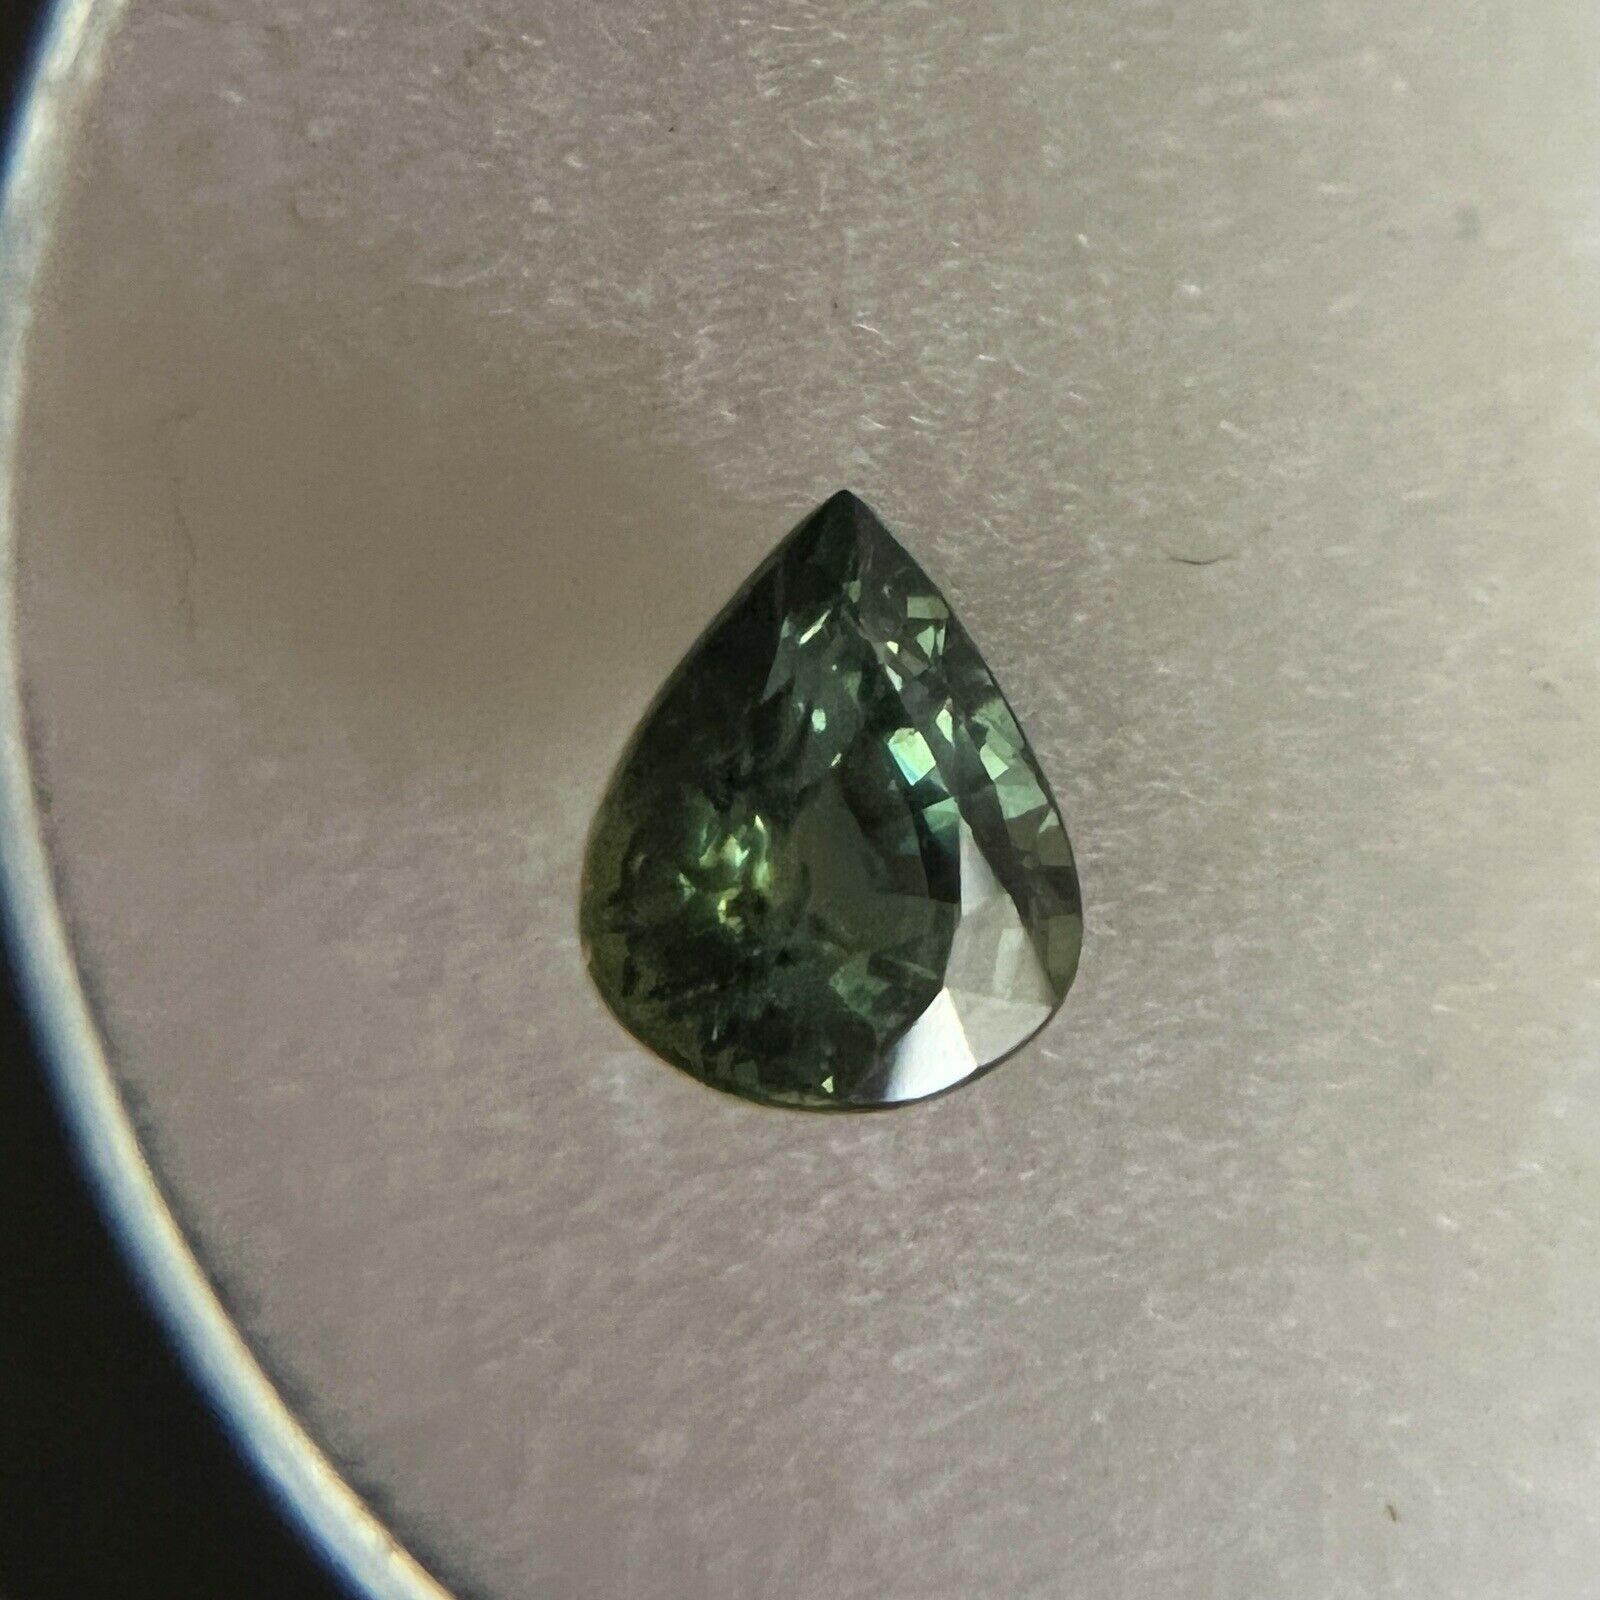 1.06ct Vivid Green Australia Sapphire Pear Teardrop Cut Loose Gem 6.8 x 5.5mm

Natural Vivid Green Blue Sapphire Gemstone. 
1.06 Carat with a beautiful vivid green colour and good clarity. Some small natural inclusions visible when looking closely